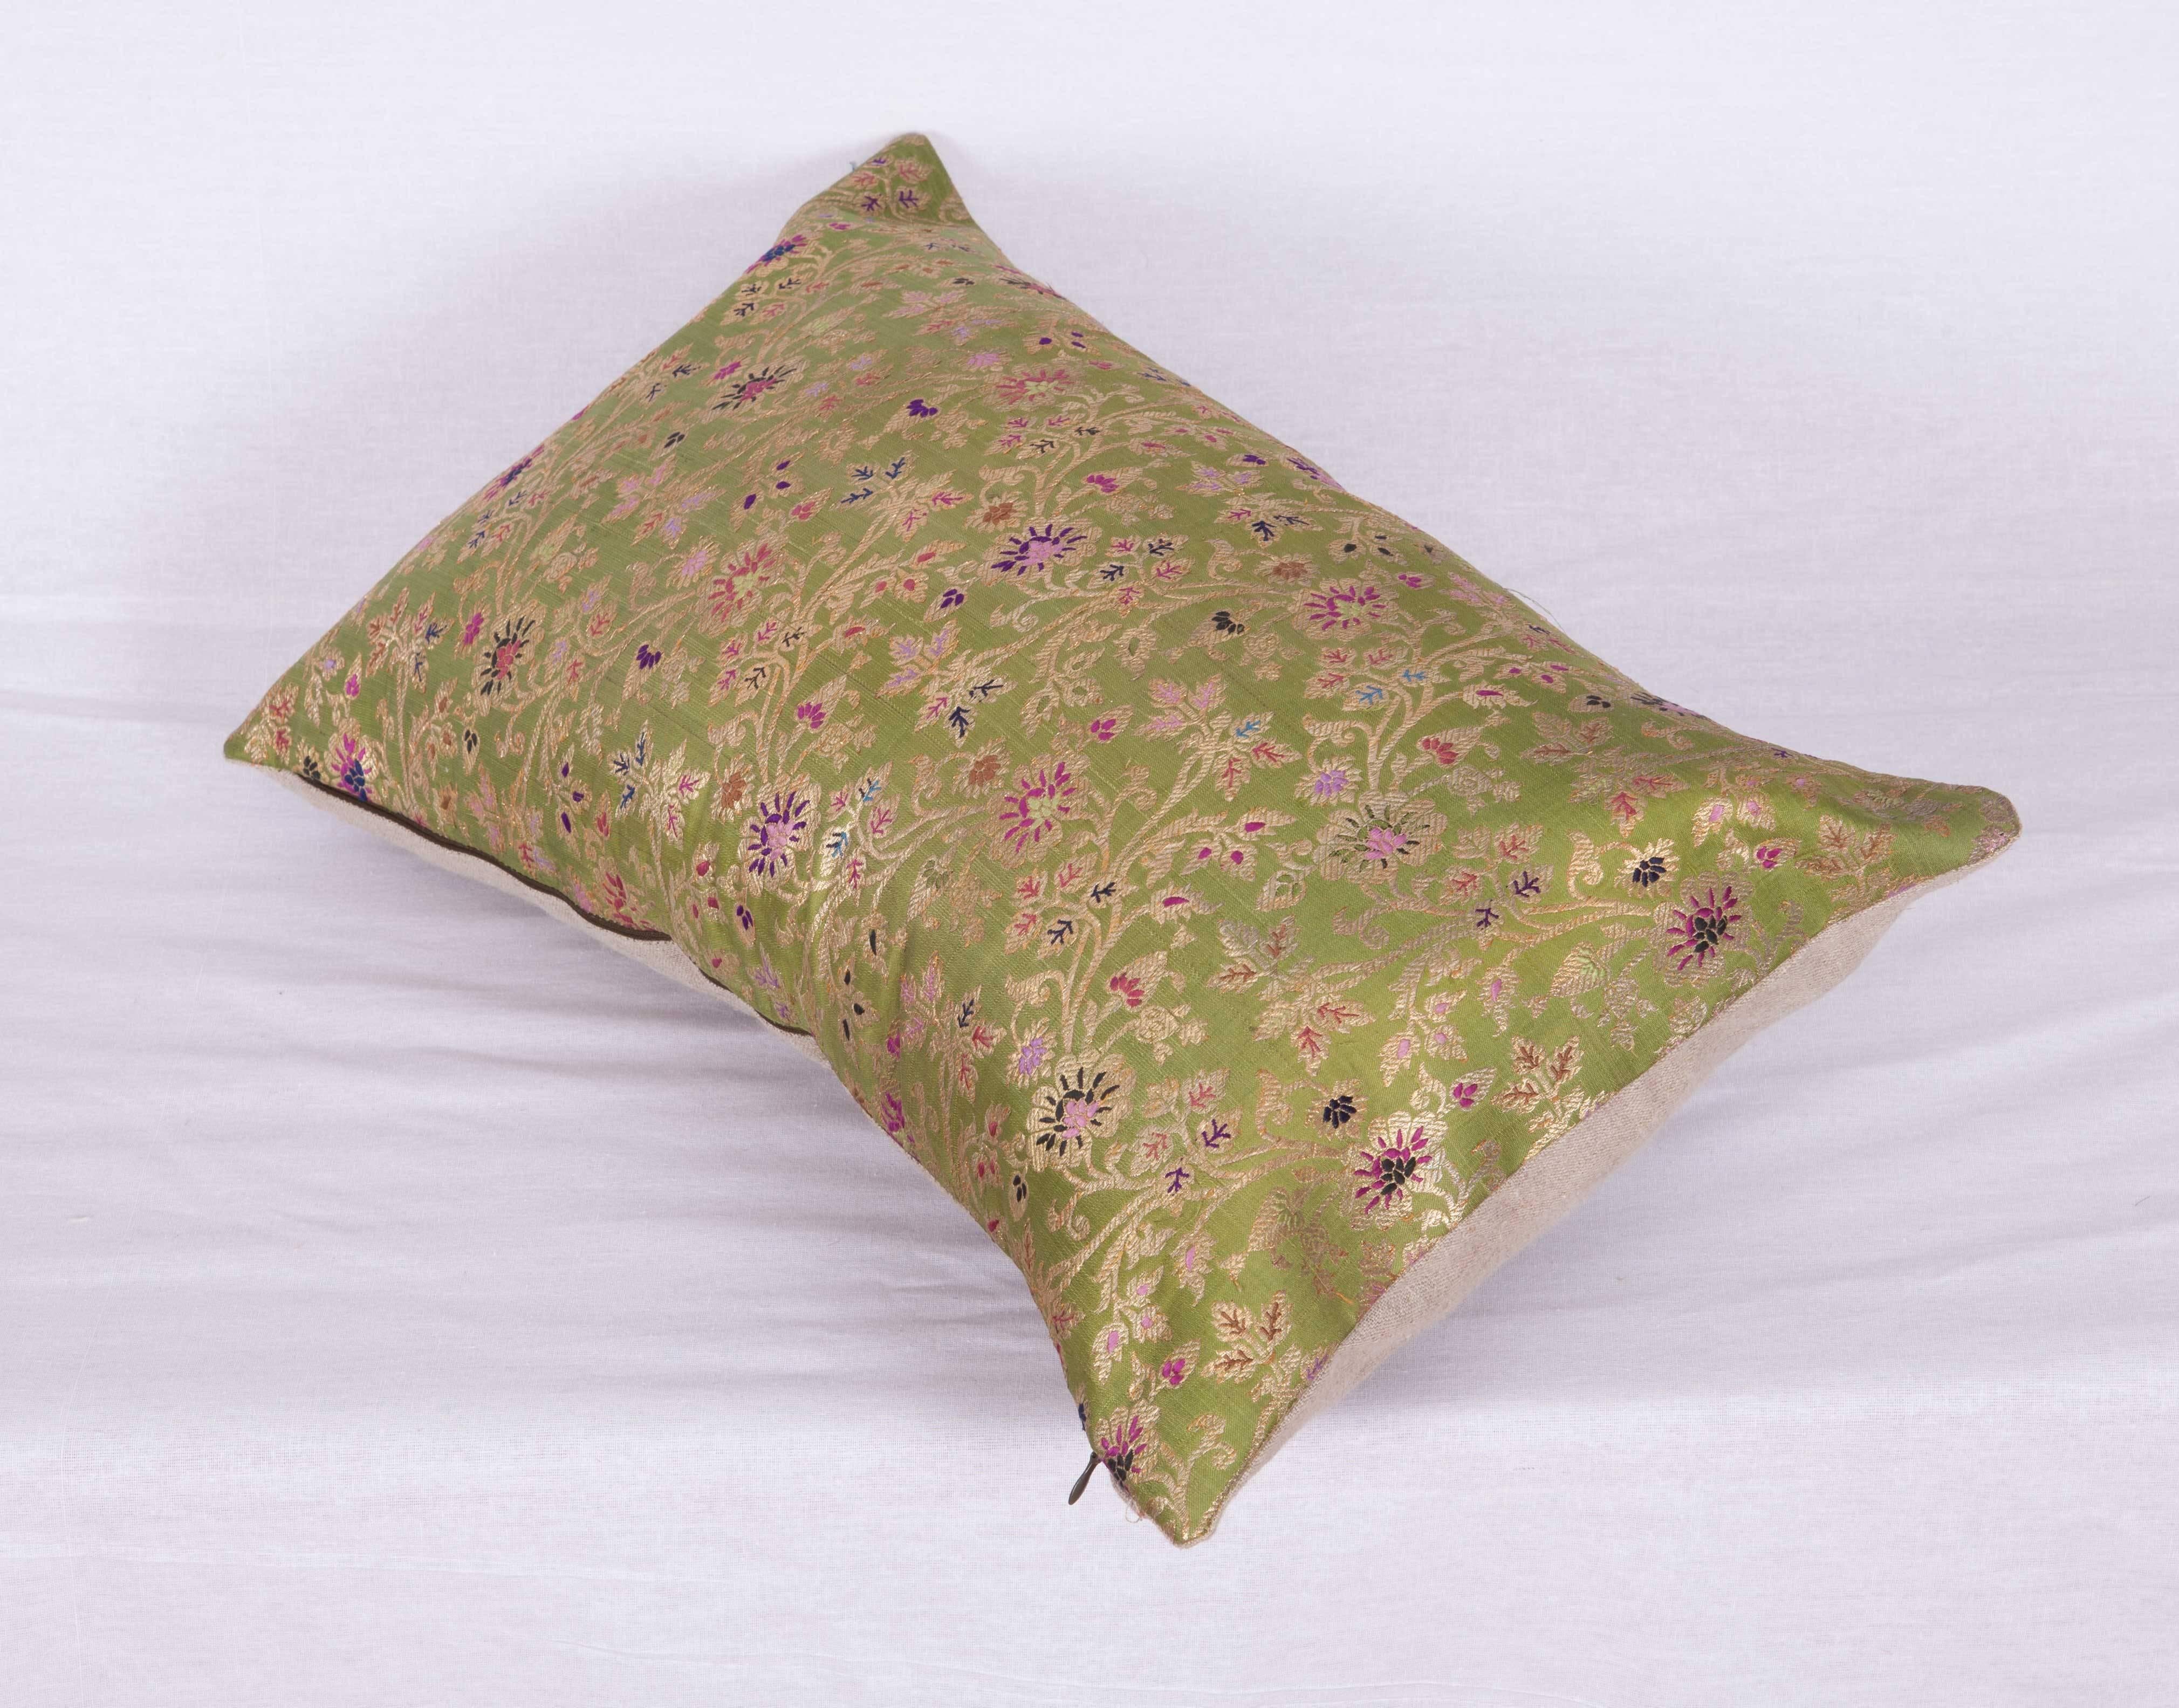 Linen Antique Pillow Made Out of a 19th Century Persian Brocade